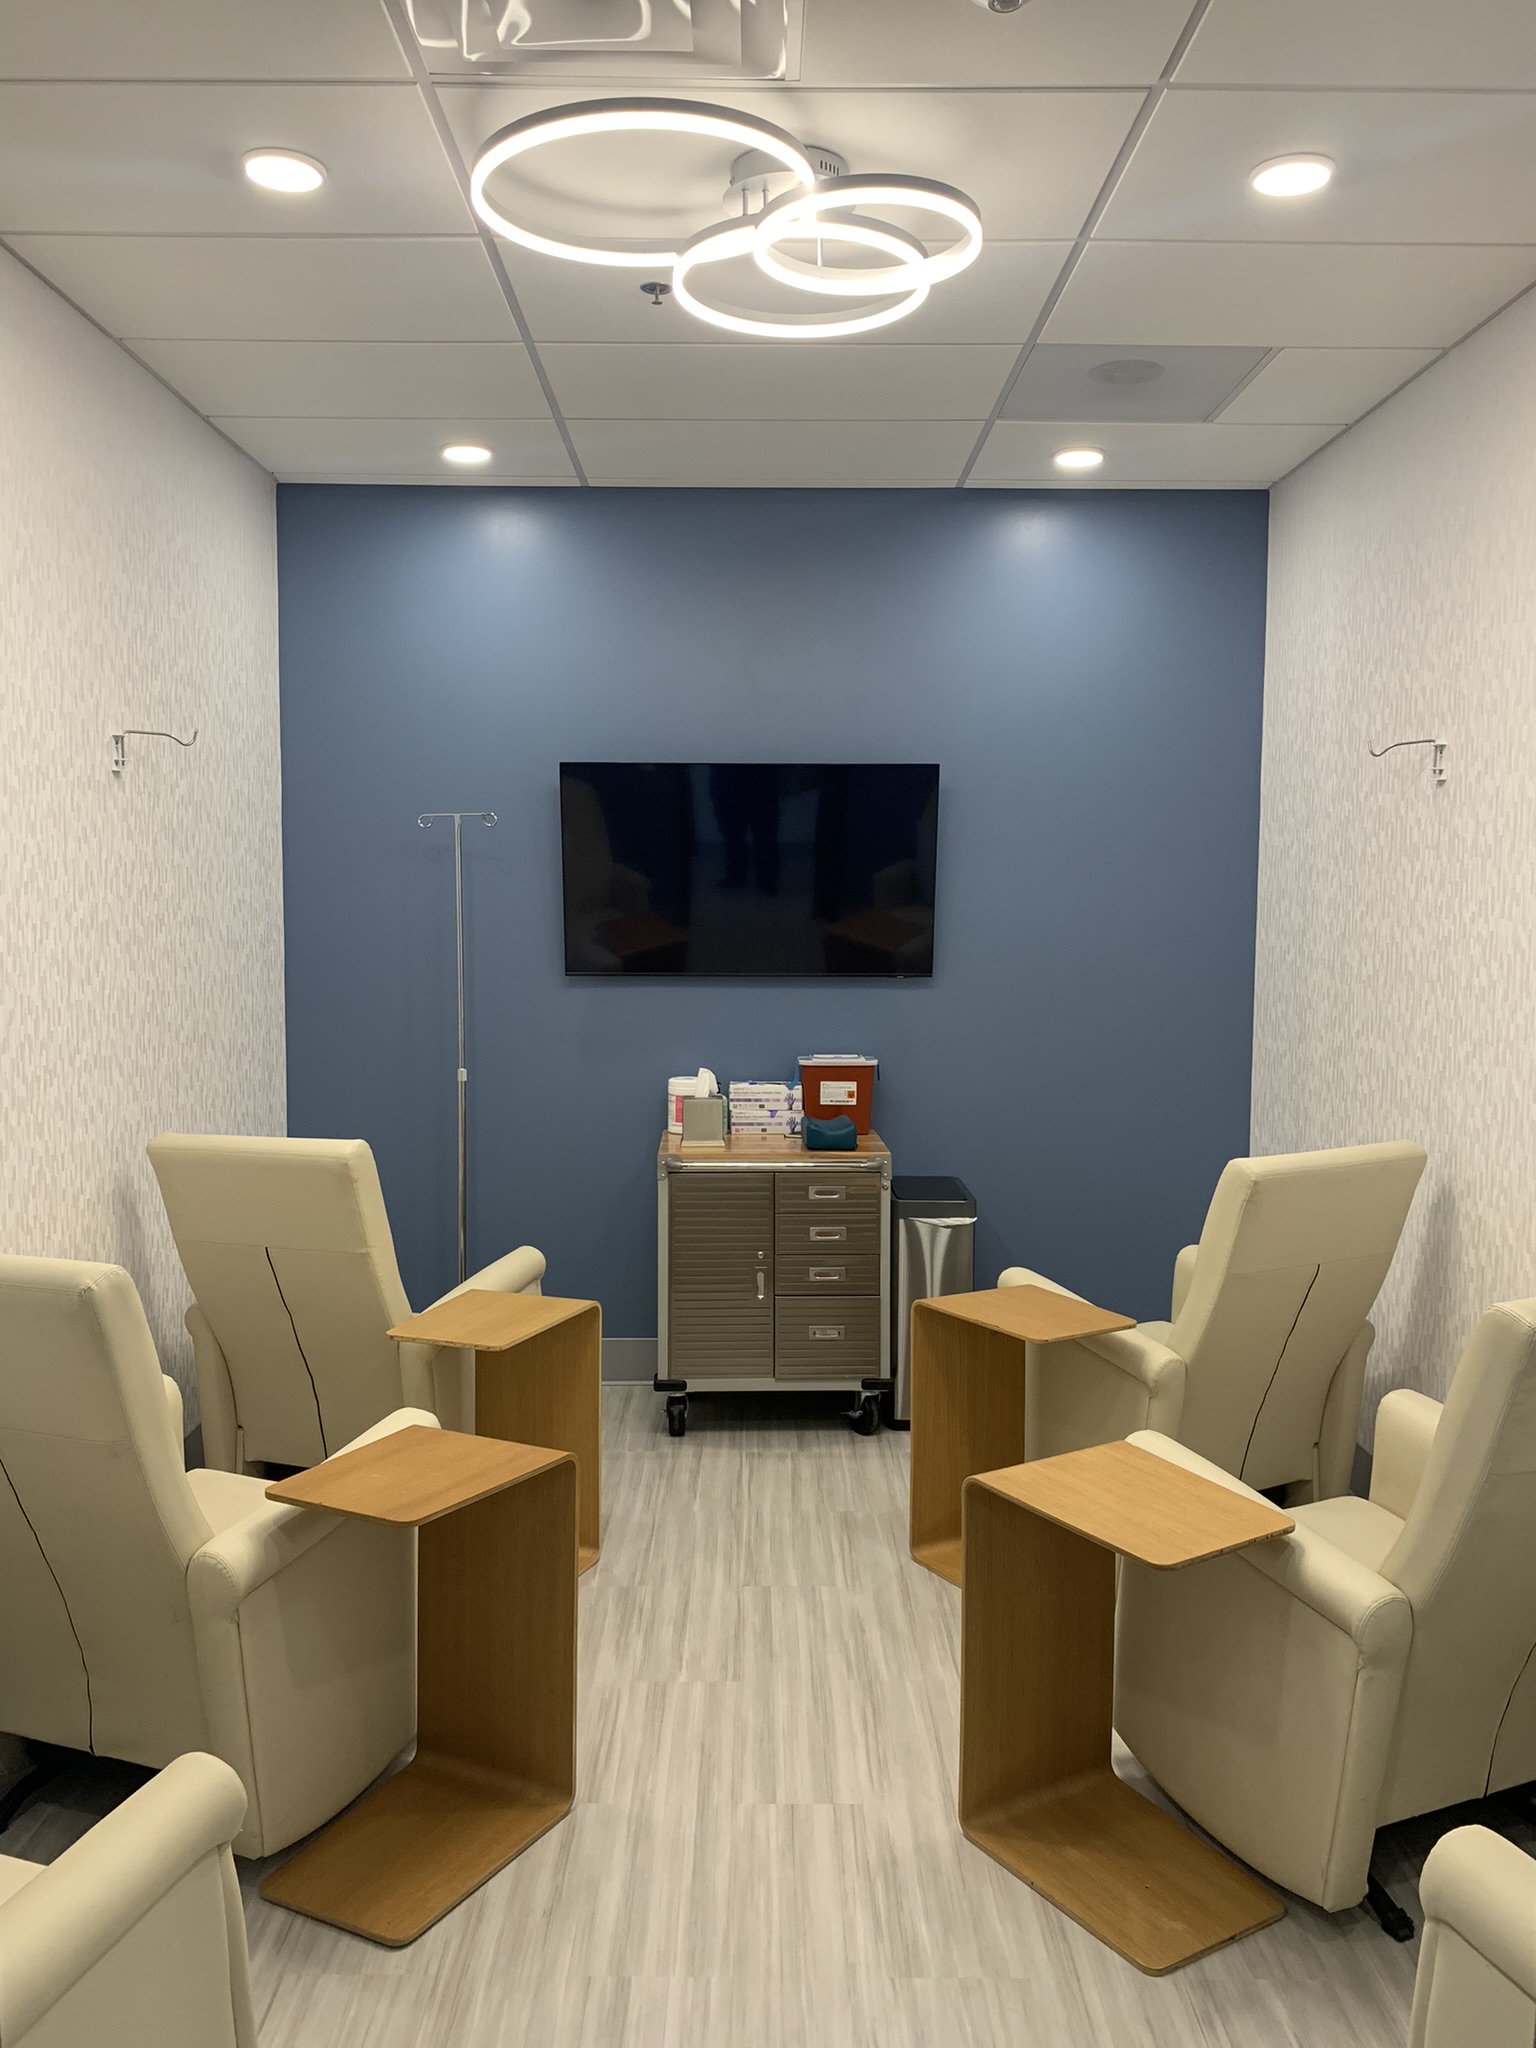 IV micronutrient therapy room in Nava Health, Ashburn